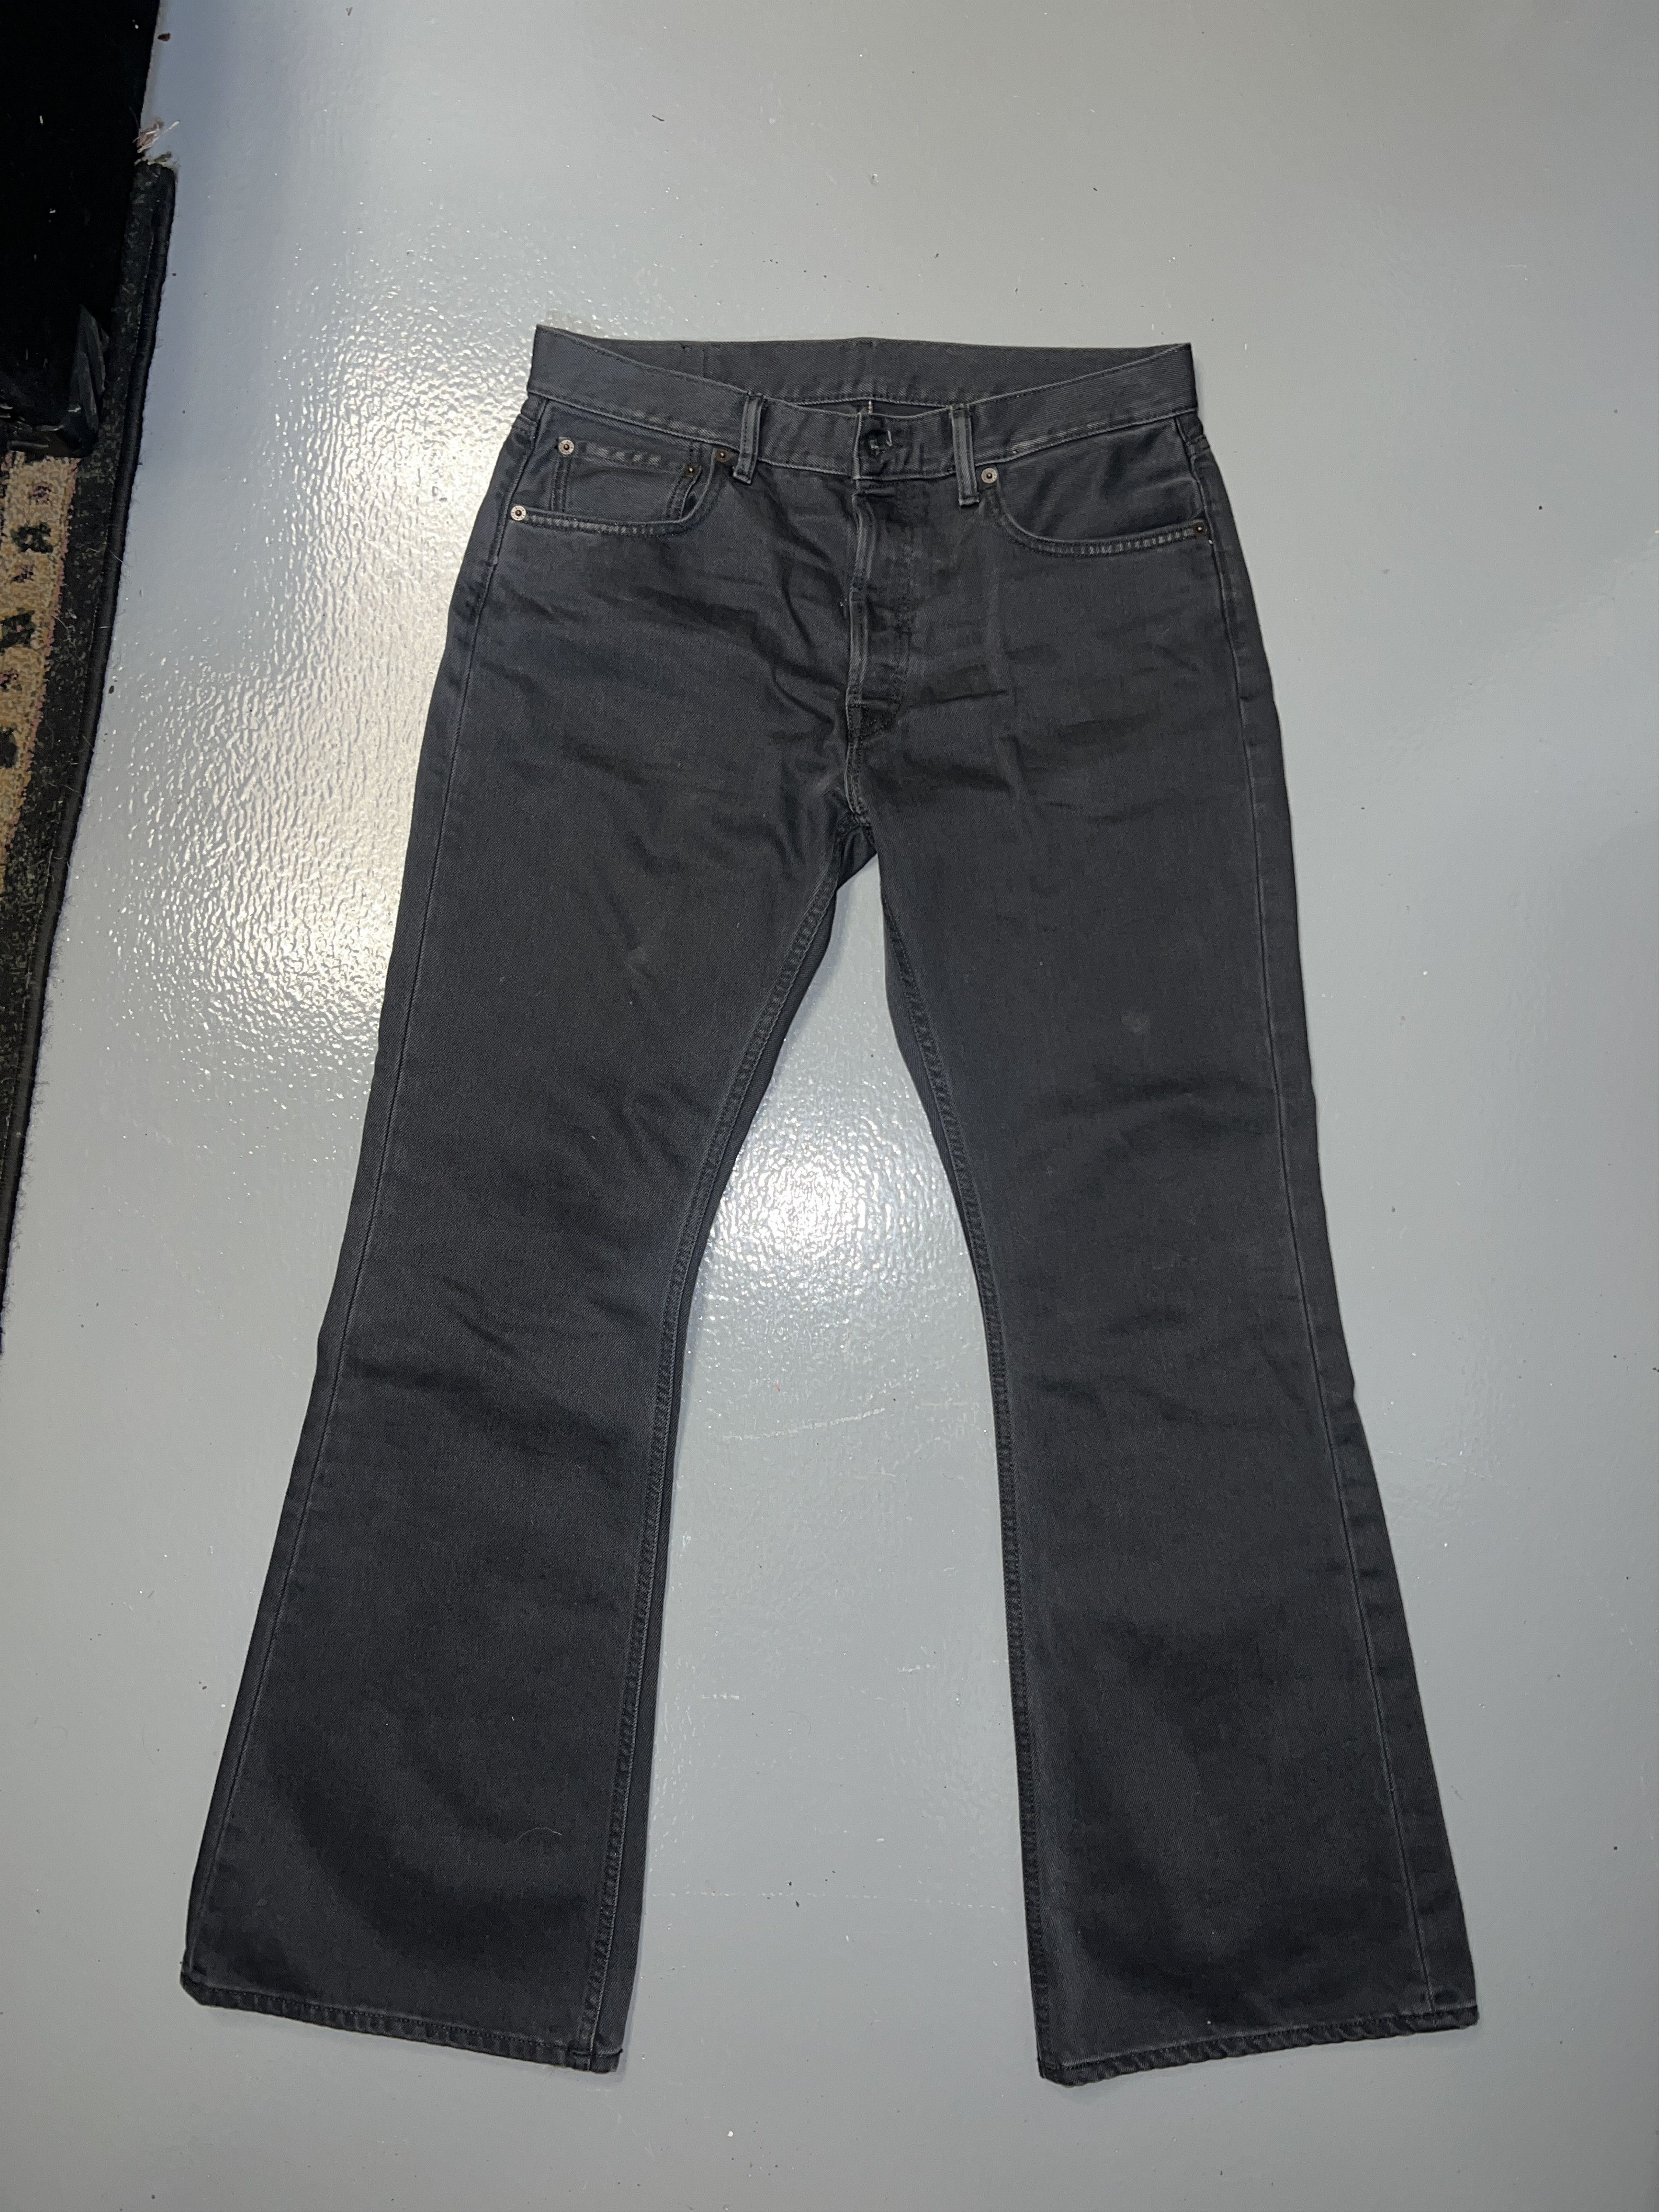 Acne Studios 1992 Flared Jeans Size US 34 / EU 50 - 1 Preview